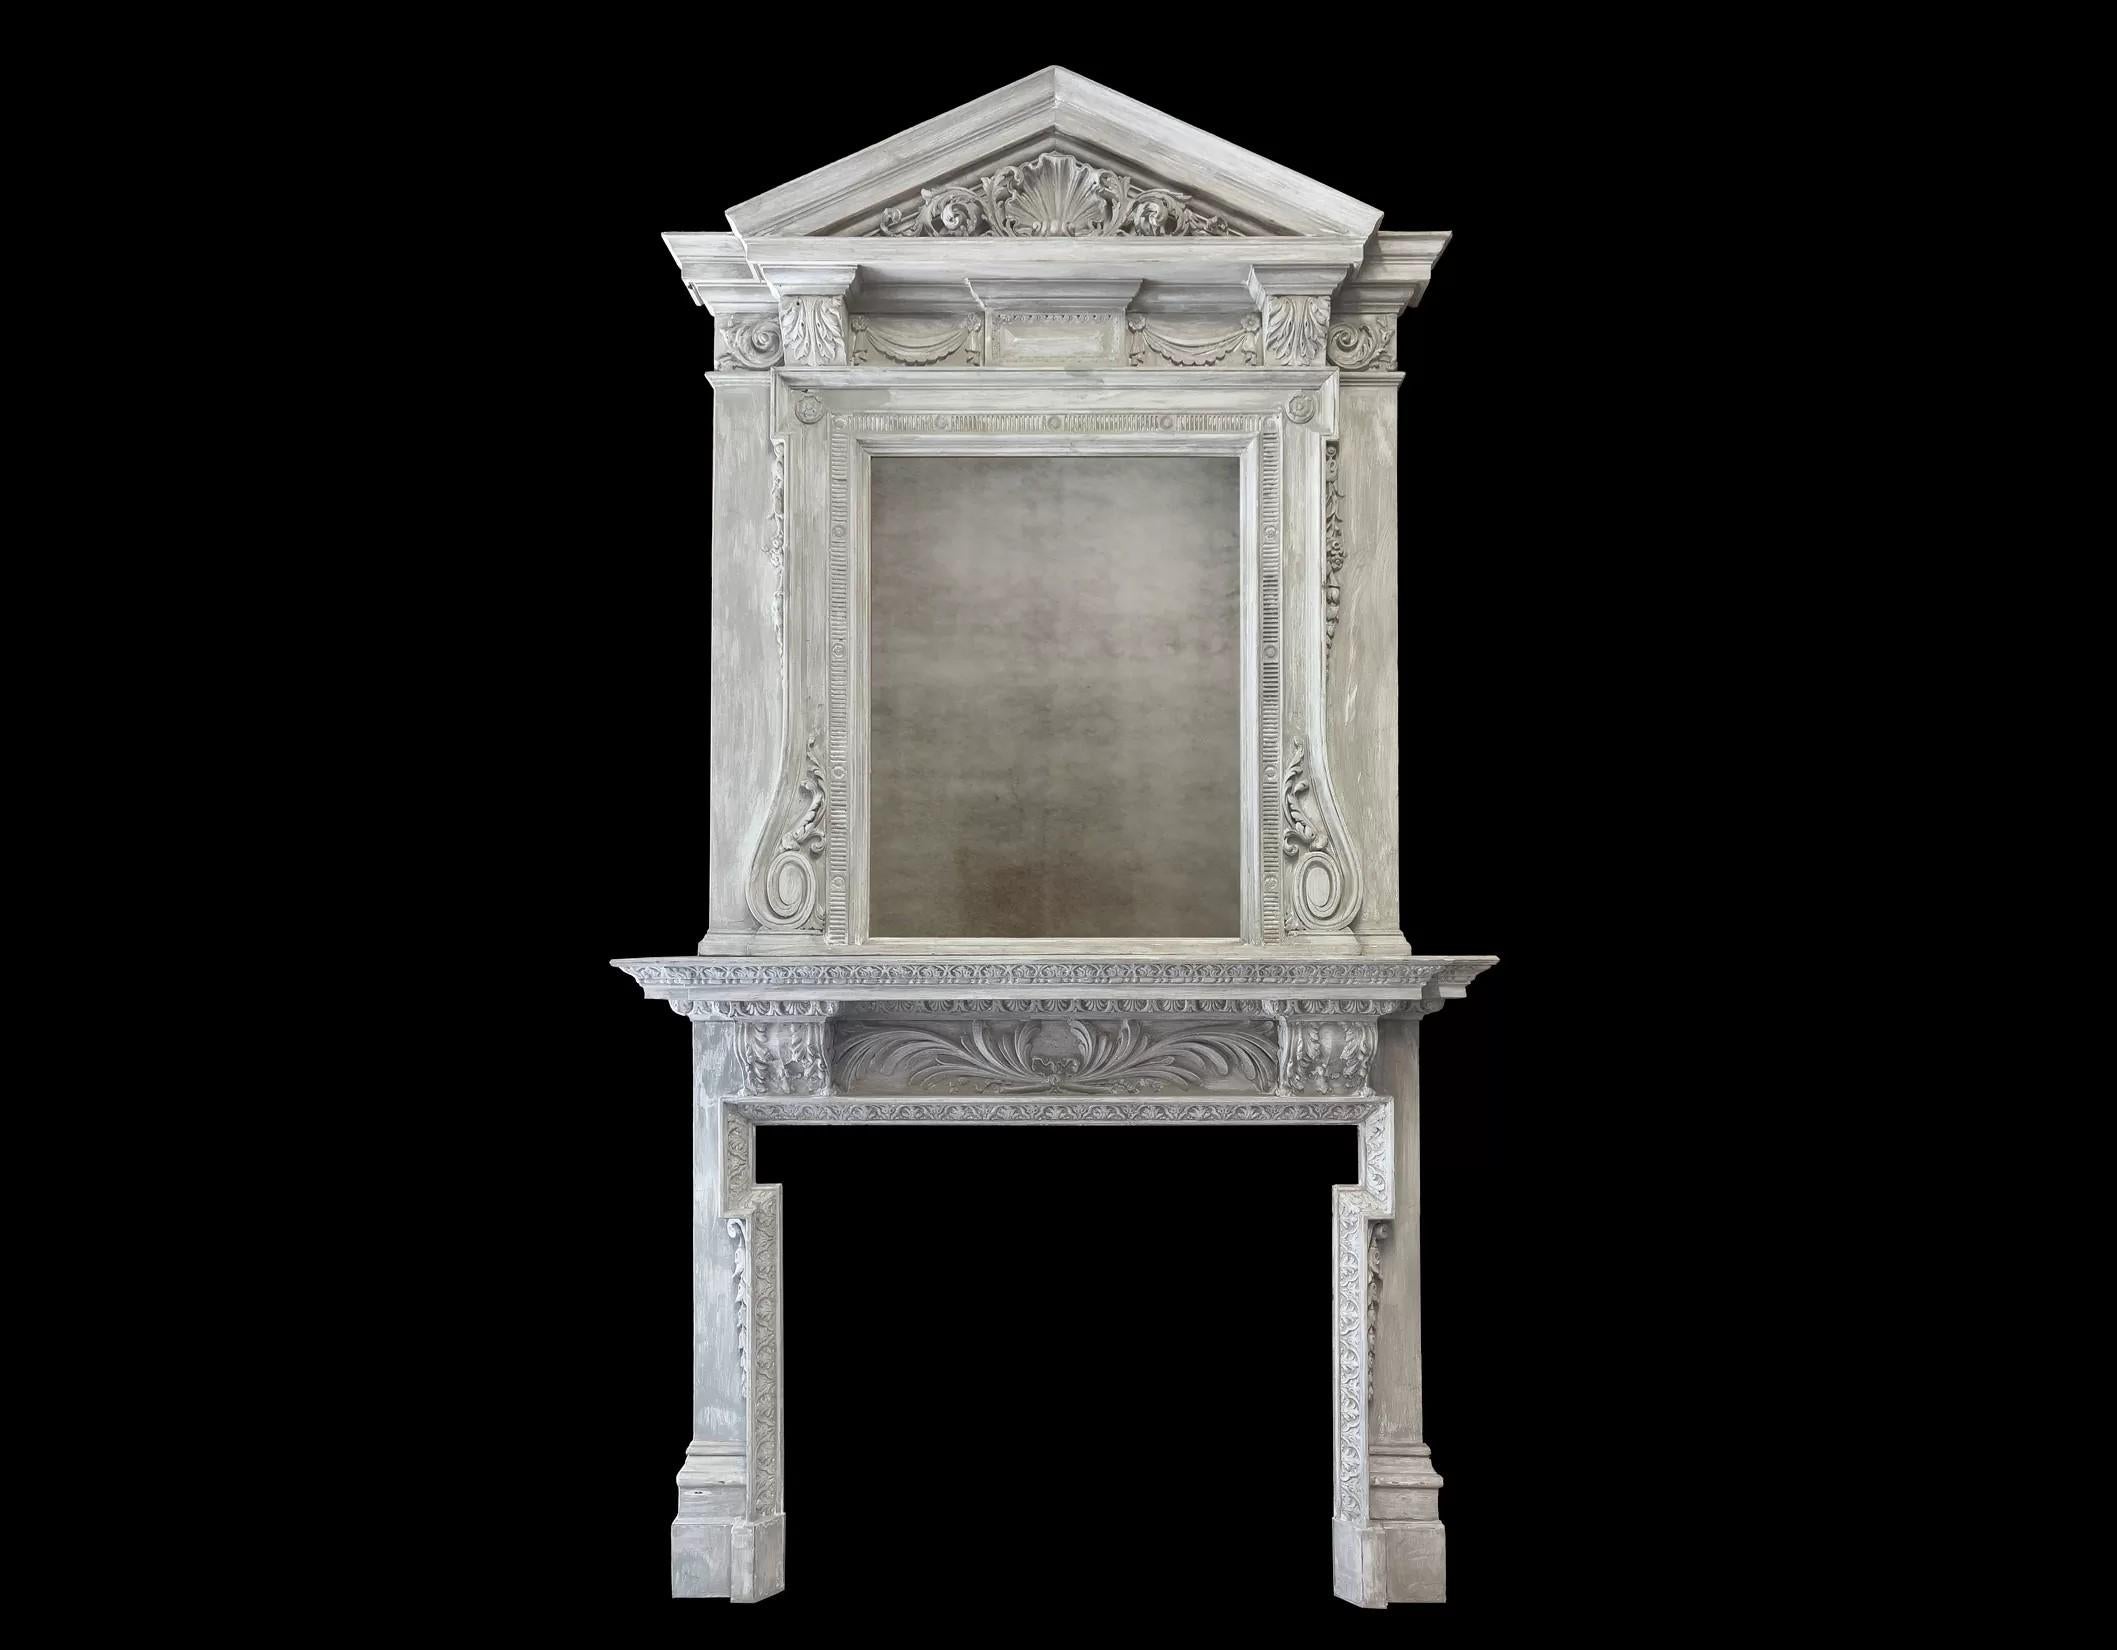 A large antique painted wooden fireplace with overmantel mirror.
Made in the George II Palladian taste and retaining its original painted finish.

The bottom section frieze with a laurel spray flanked by bracket corbels, this above a dog legged